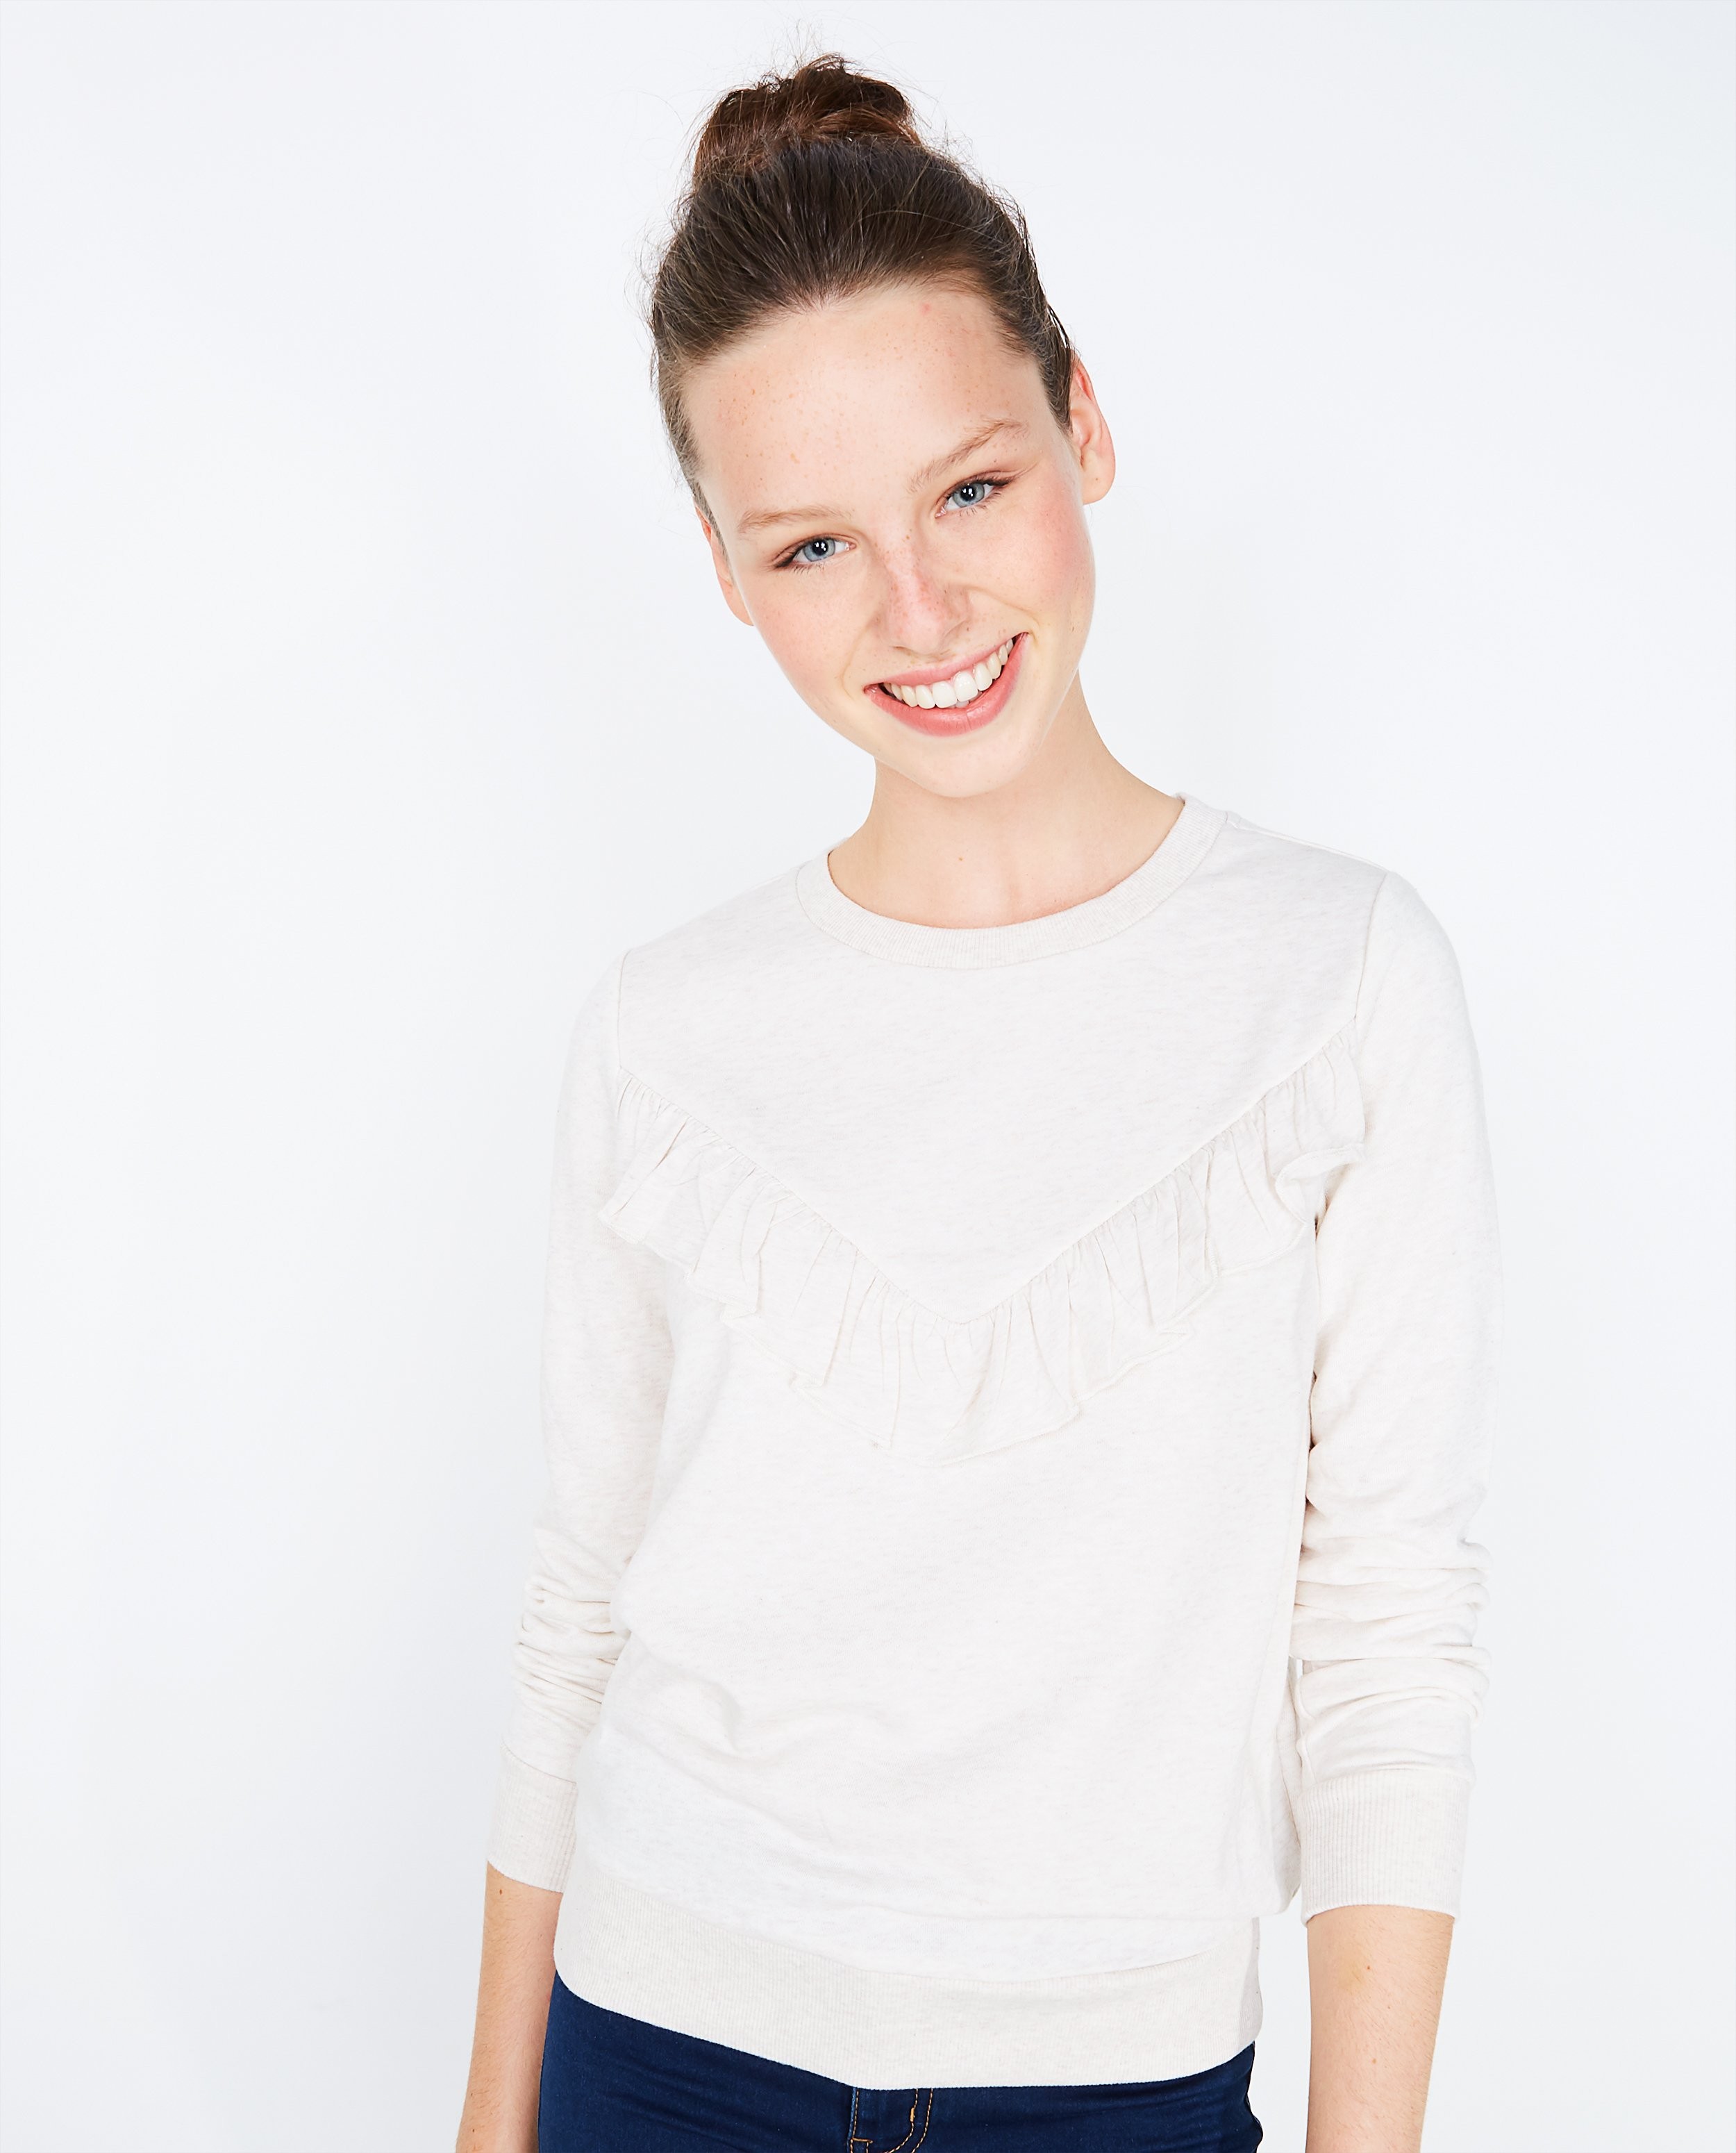 Sweaters - Donkergrijze sweater met ruches